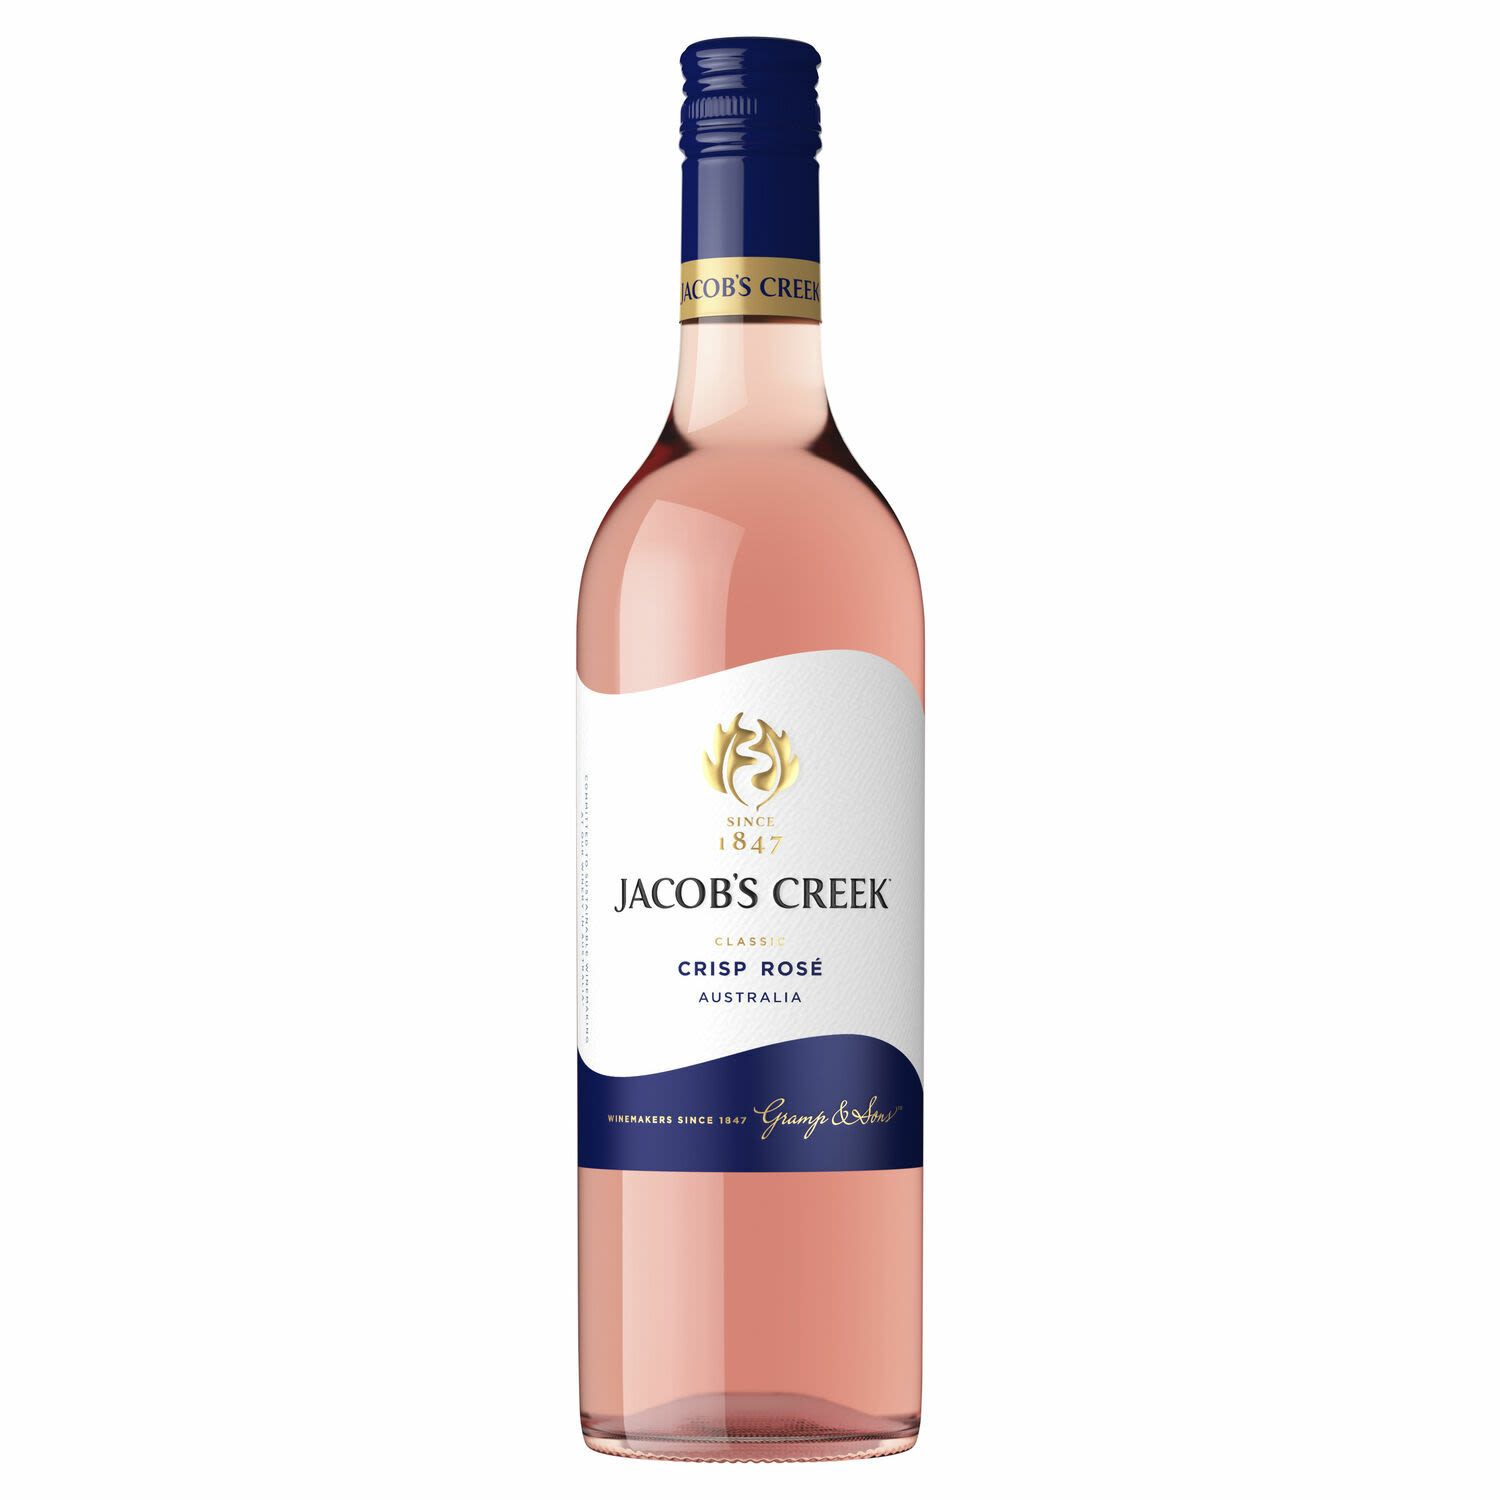 Lifted strawberry and fresh raspberry aromas. Sweet Berry flavours are beautifully enhanced by subtle spice notes. The palate is luscious yet fresh, with a clean and crisp finish.<br /> <br />Alcohol Volume: 12.50%<br /><br />Pack Format: Bottle<br /><br />Standard Drinks: 7.4</br /><br />Pack Type: Bottle<br /><br />Country of Origin: Australia<br /><br />Region: South Eastern Australia<br /><br />Vintage: Vintages Vary<br />